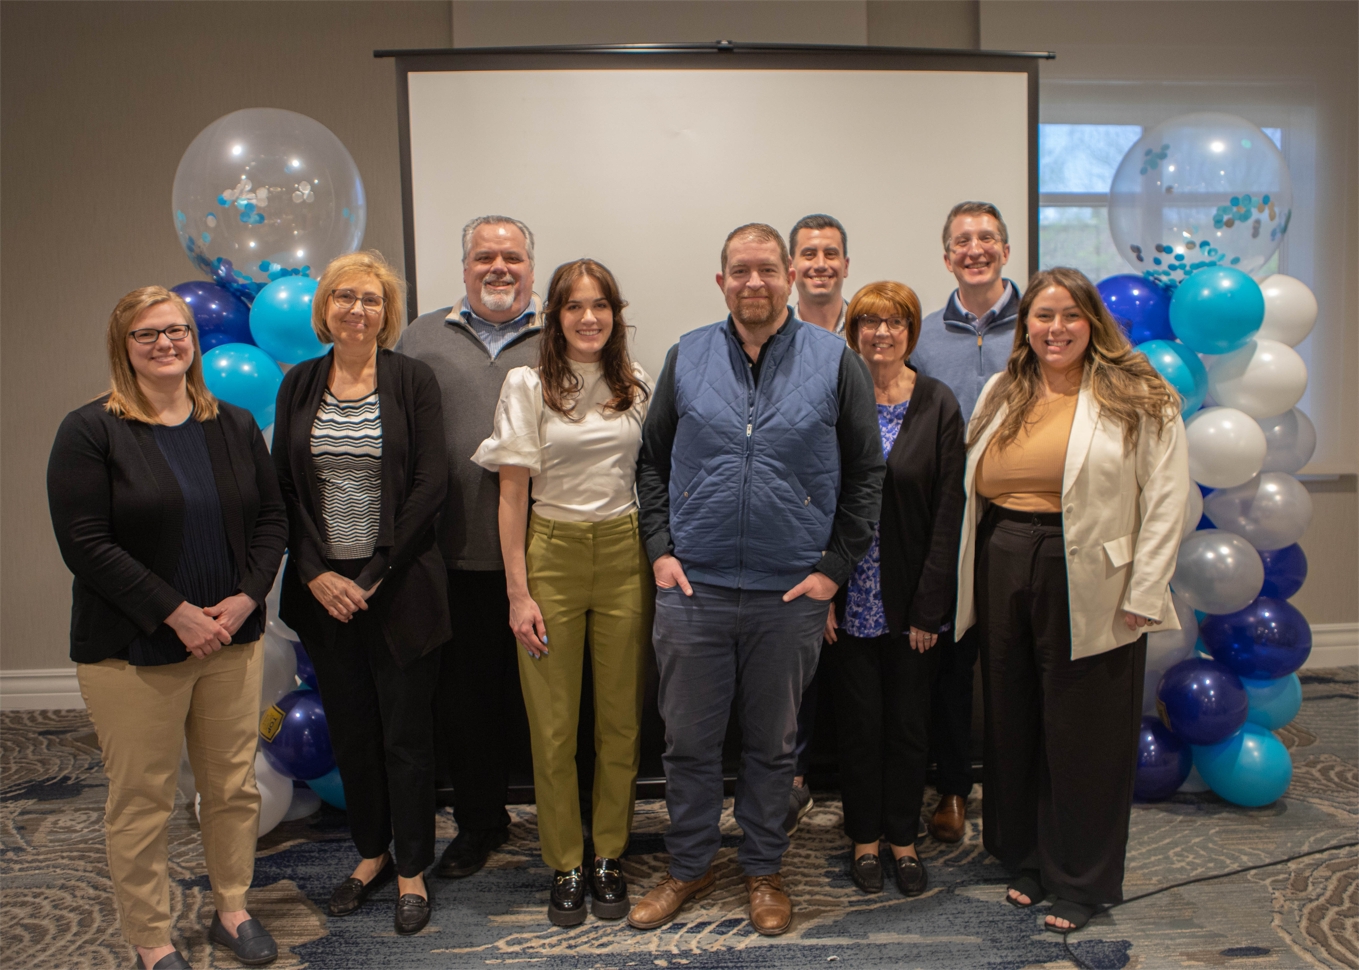 Congratulations to our recent employee promotions!